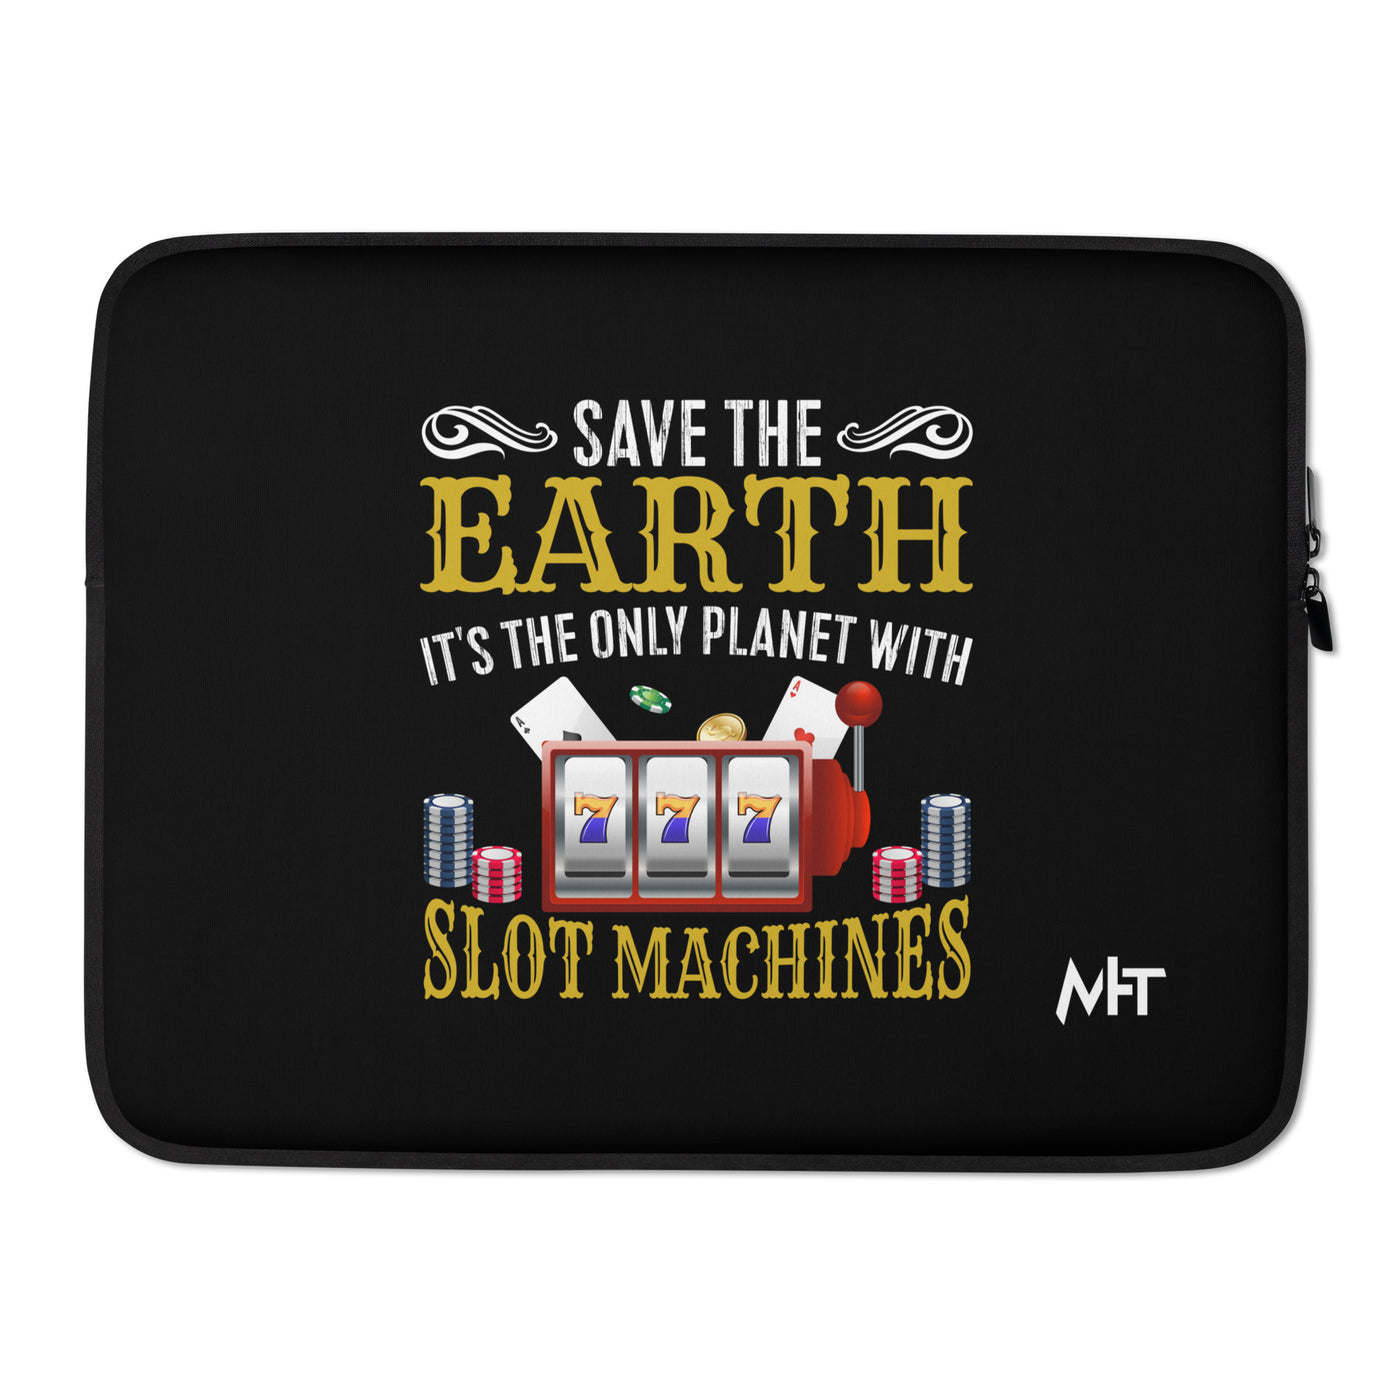 Save the Earth; it's the only Planet with Slot Machines - Laptop Sleeve